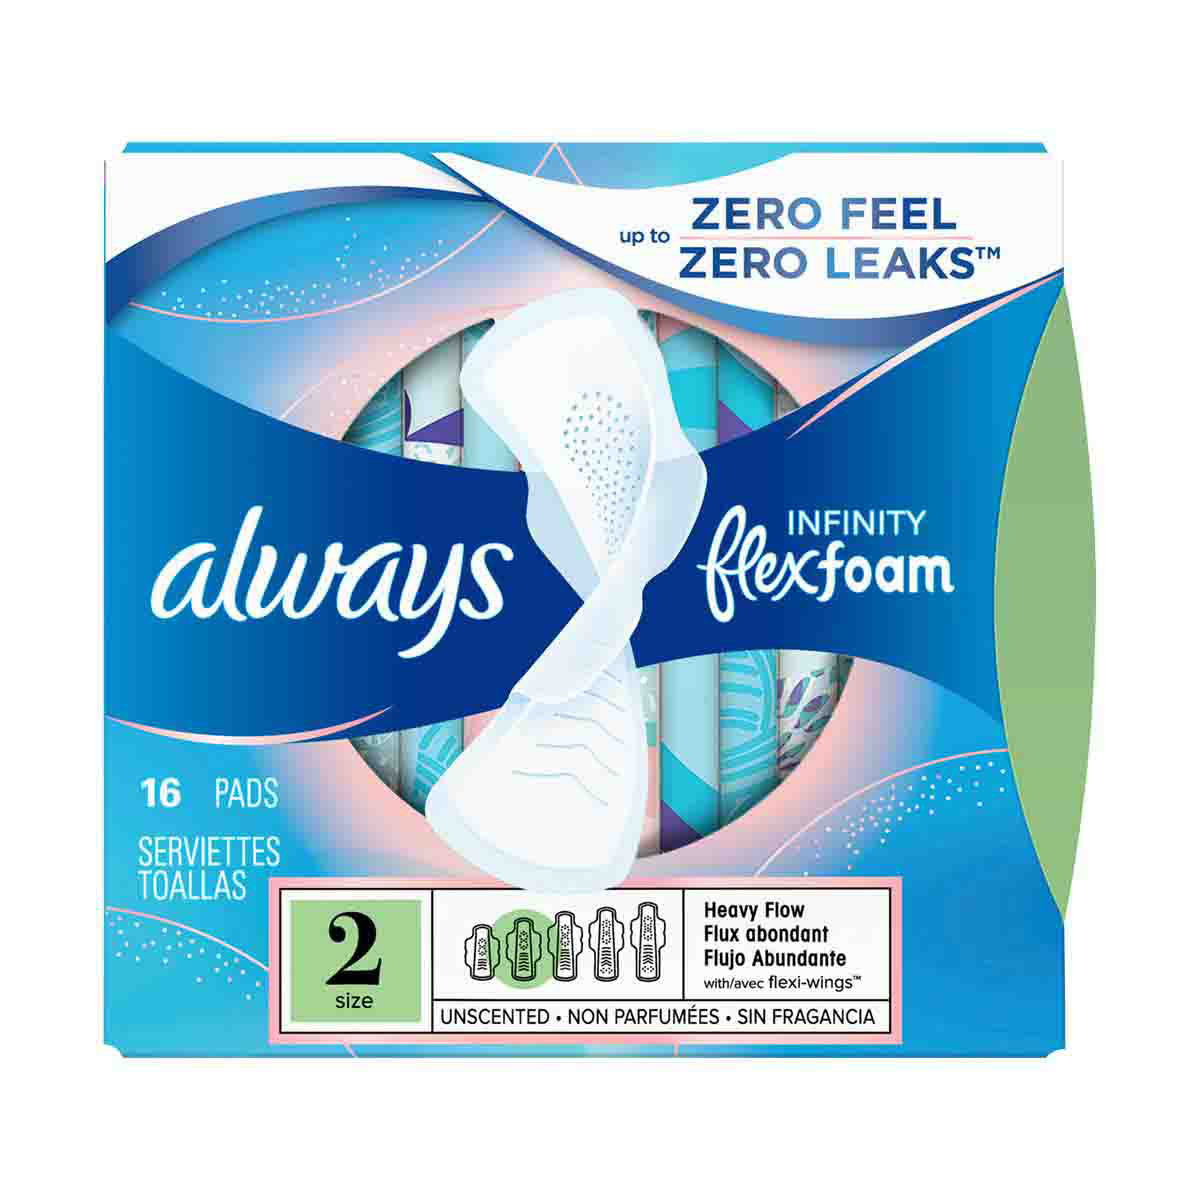 Always Maxi Pads with Wings, Size 2, Long Super Absorbency, 42 CT